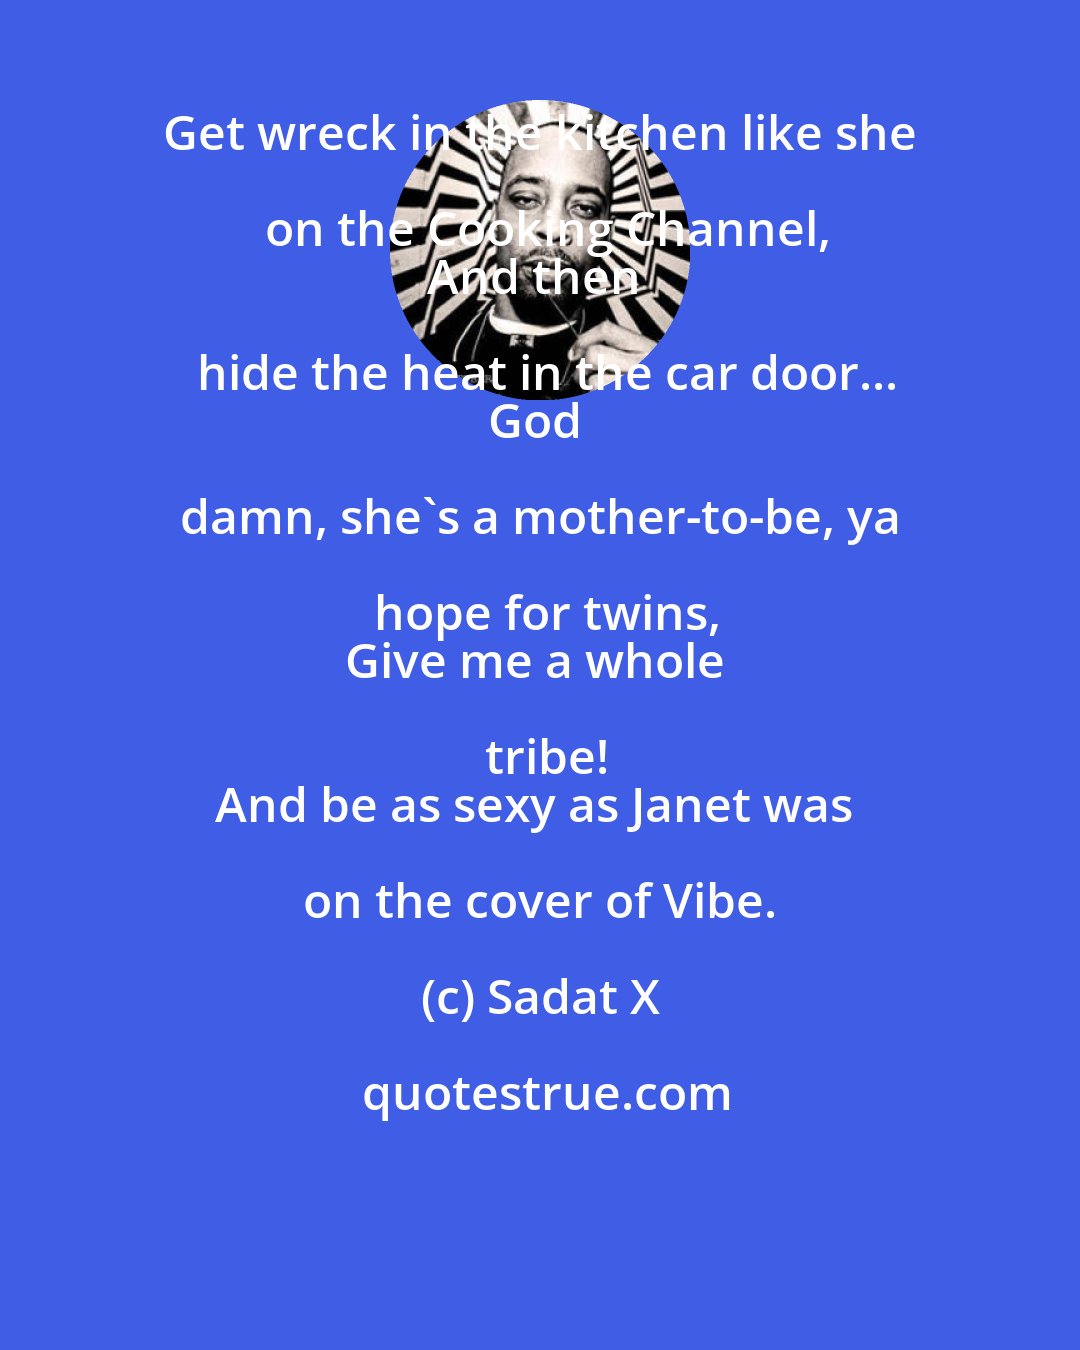 Sadat X: Get wreck in the kitchen like she on the Cooking Channel,
And then hide the heat in the car door...
God damn, she's a mother-to-be, ya hope for twins,
Give me a whole tribe!
And be as sexy as Janet was on the cover of Vibe.